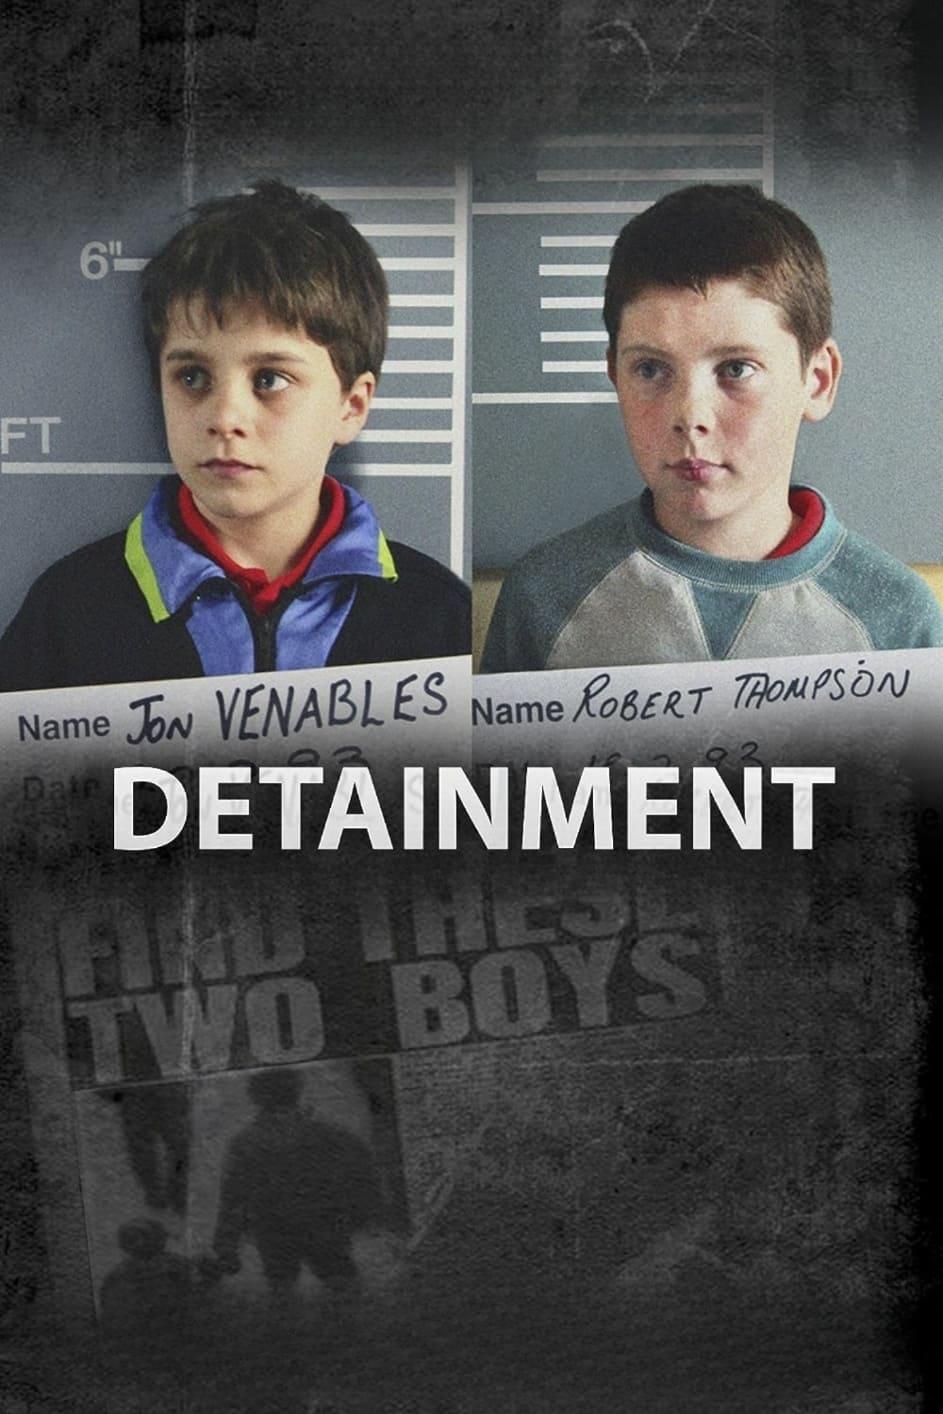 Detainment poster